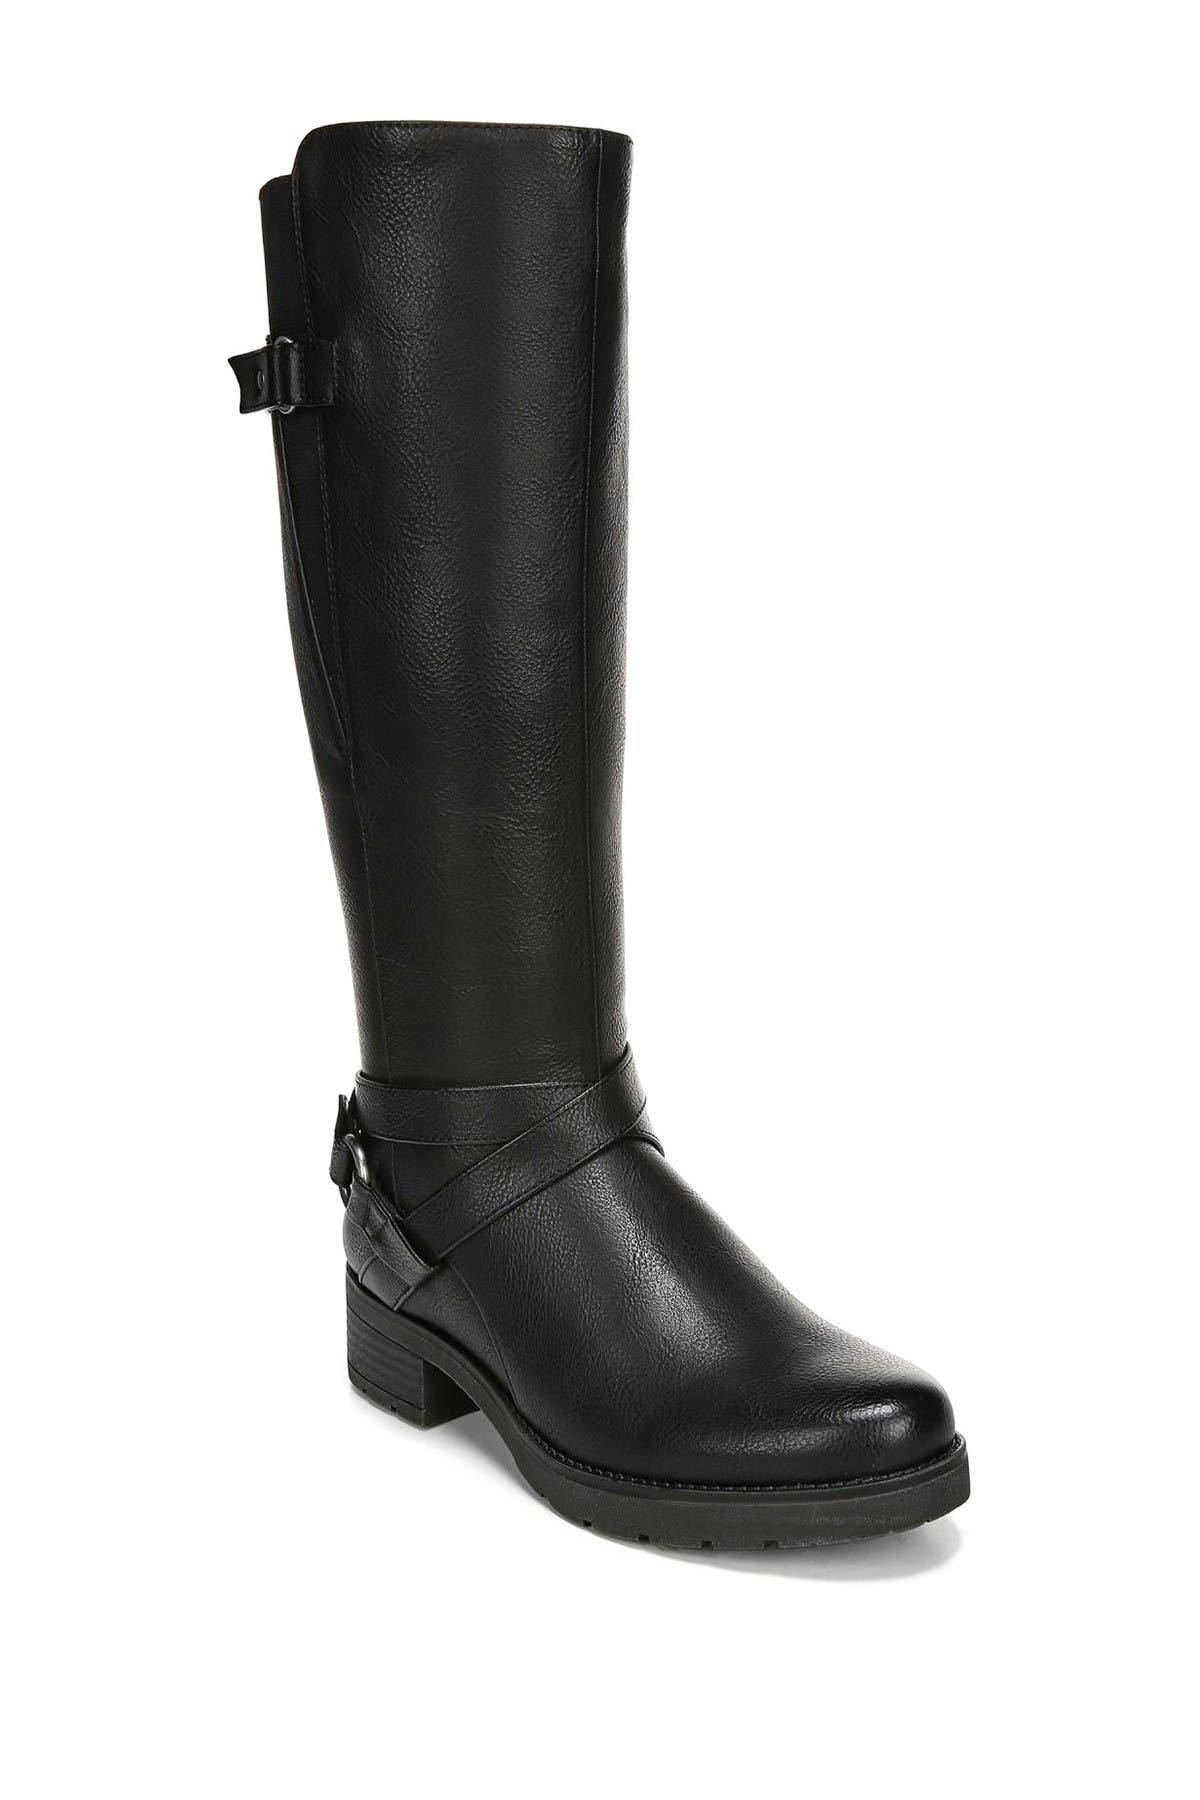 wide width boots with wide calf